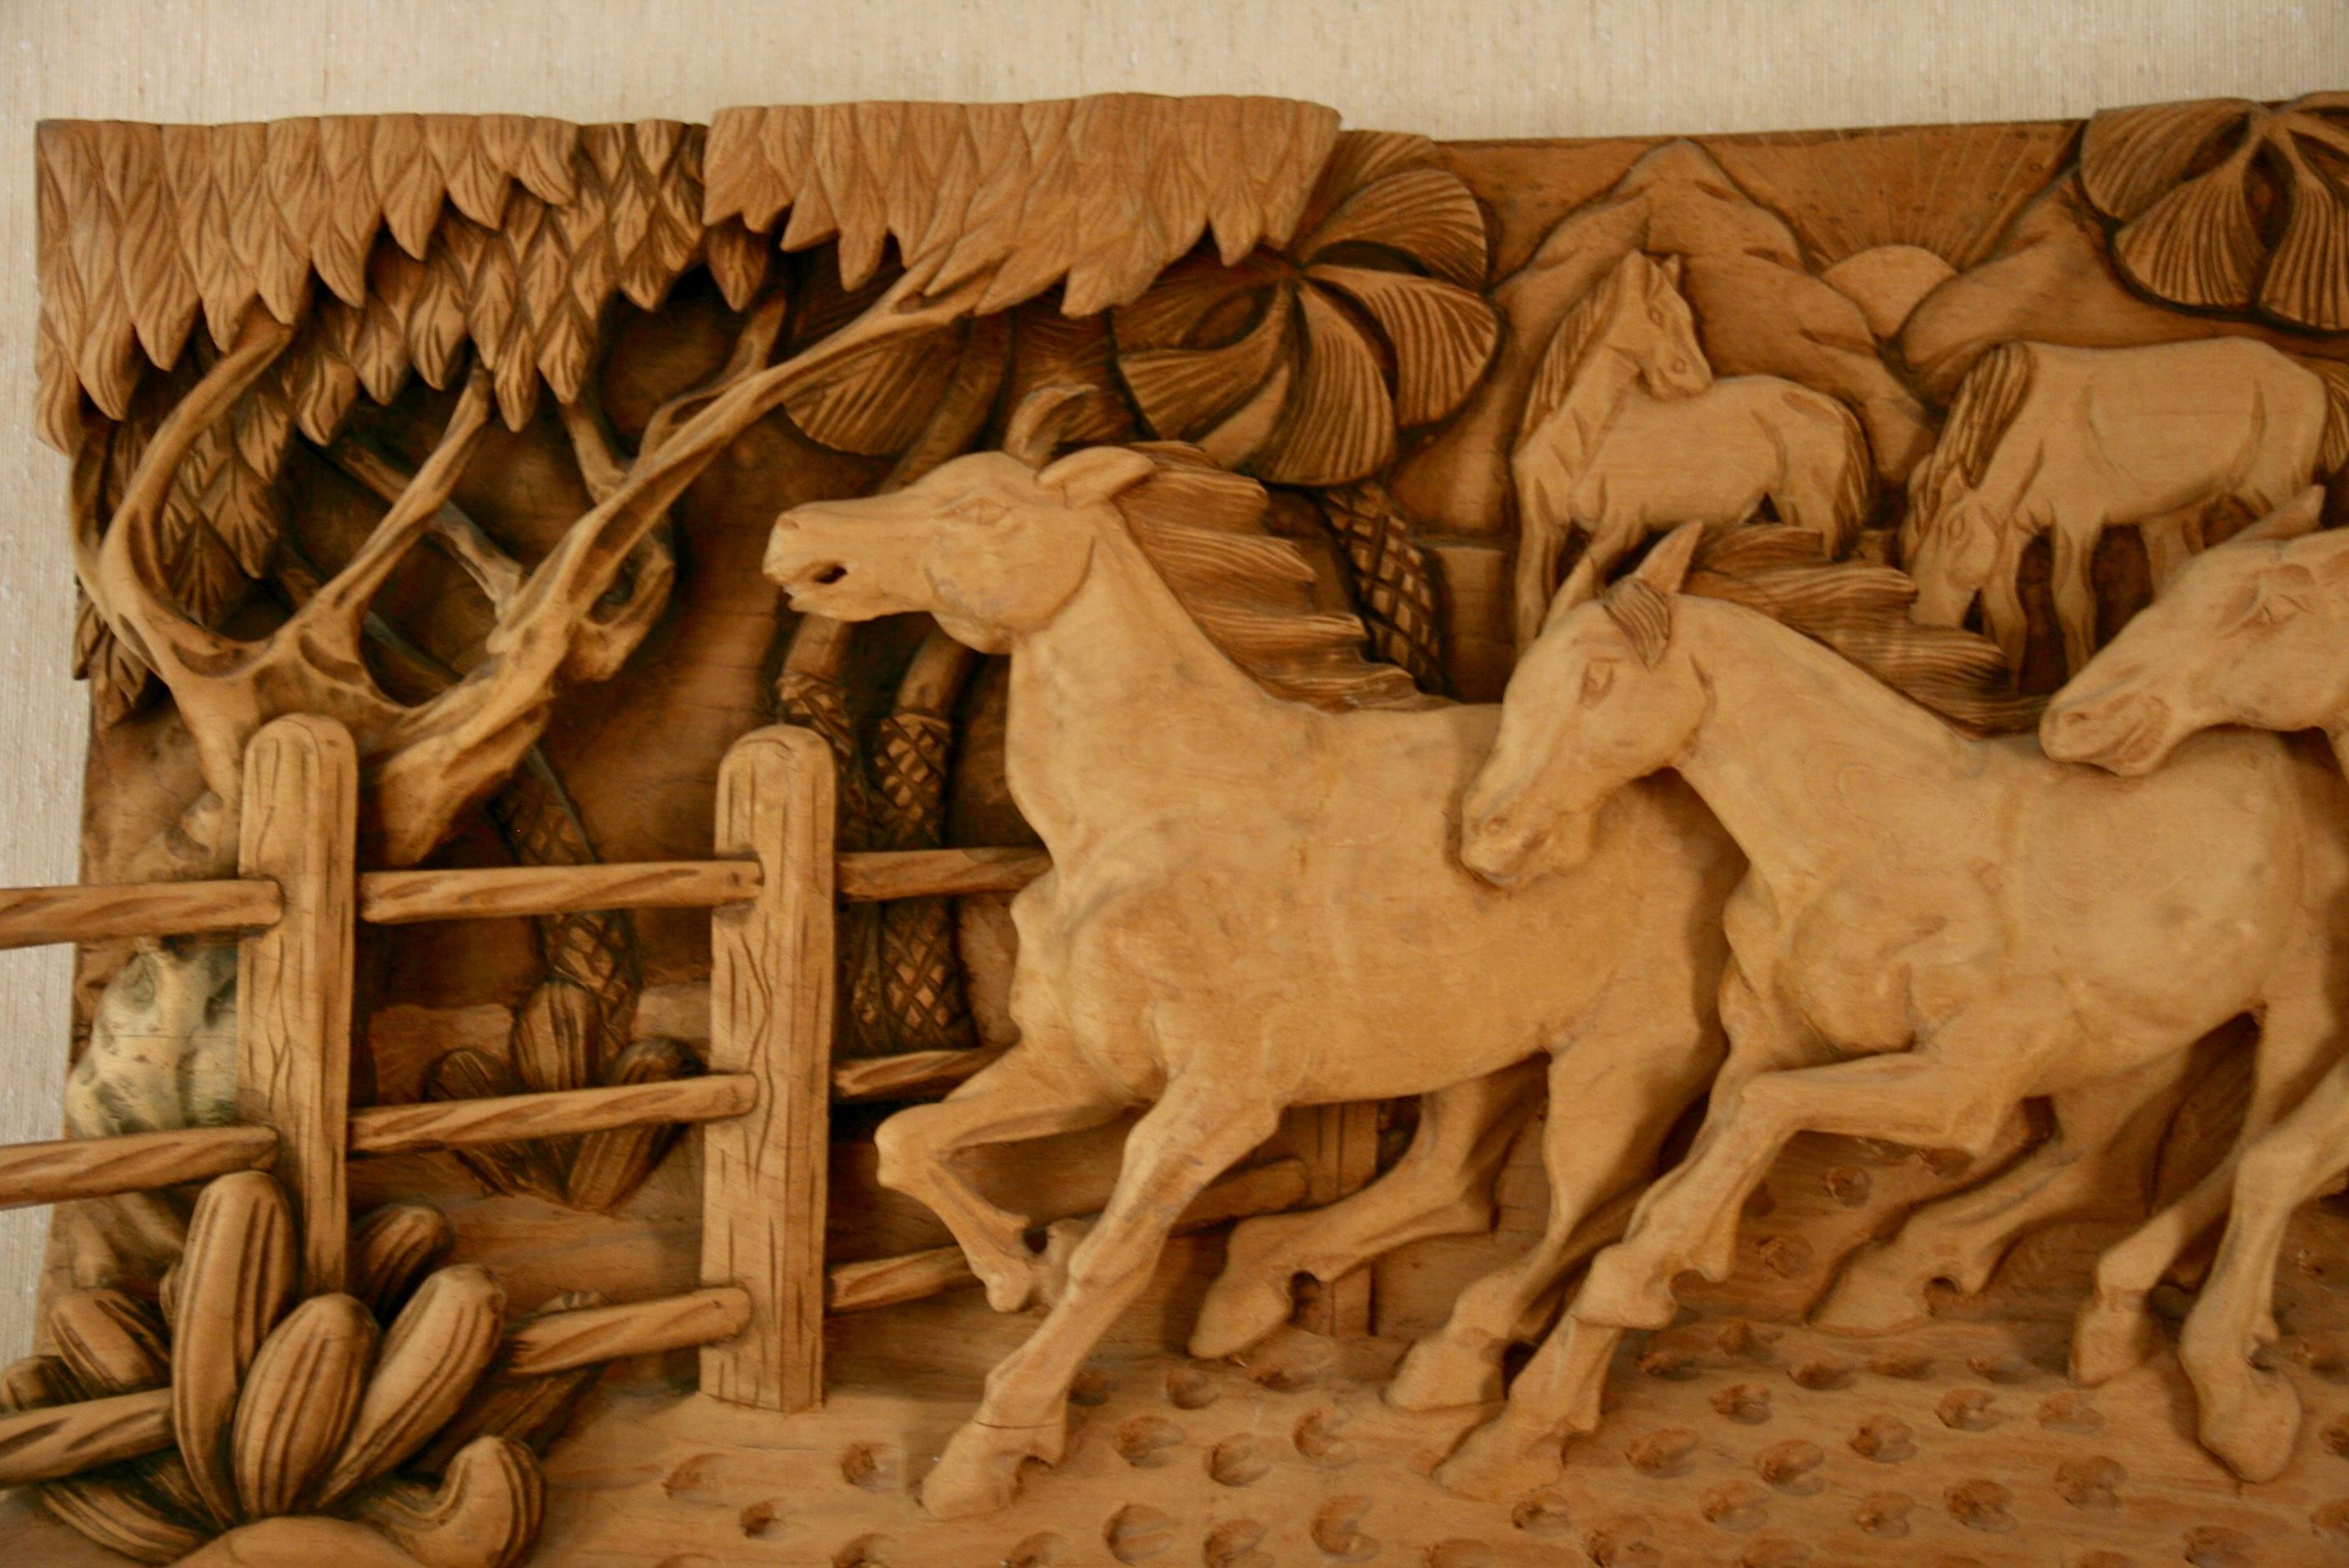 Large-scale Western wood sculpture. A large wood sculpture of horses on a  Western ranch, signed lower right by Dede 88.